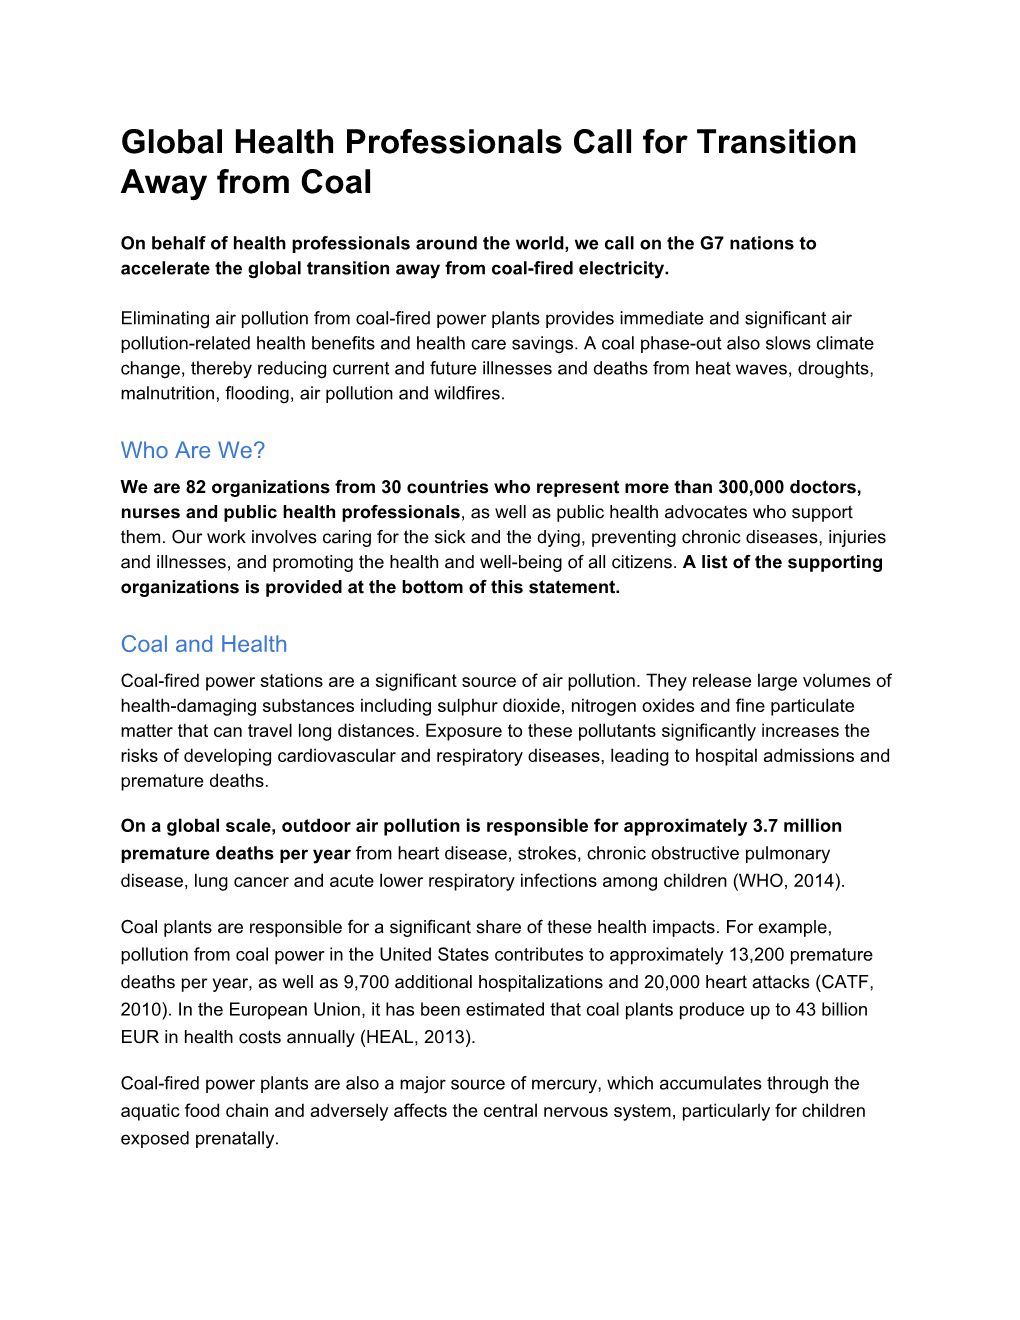 Global Health Professionals Call for Transition Away from Coal